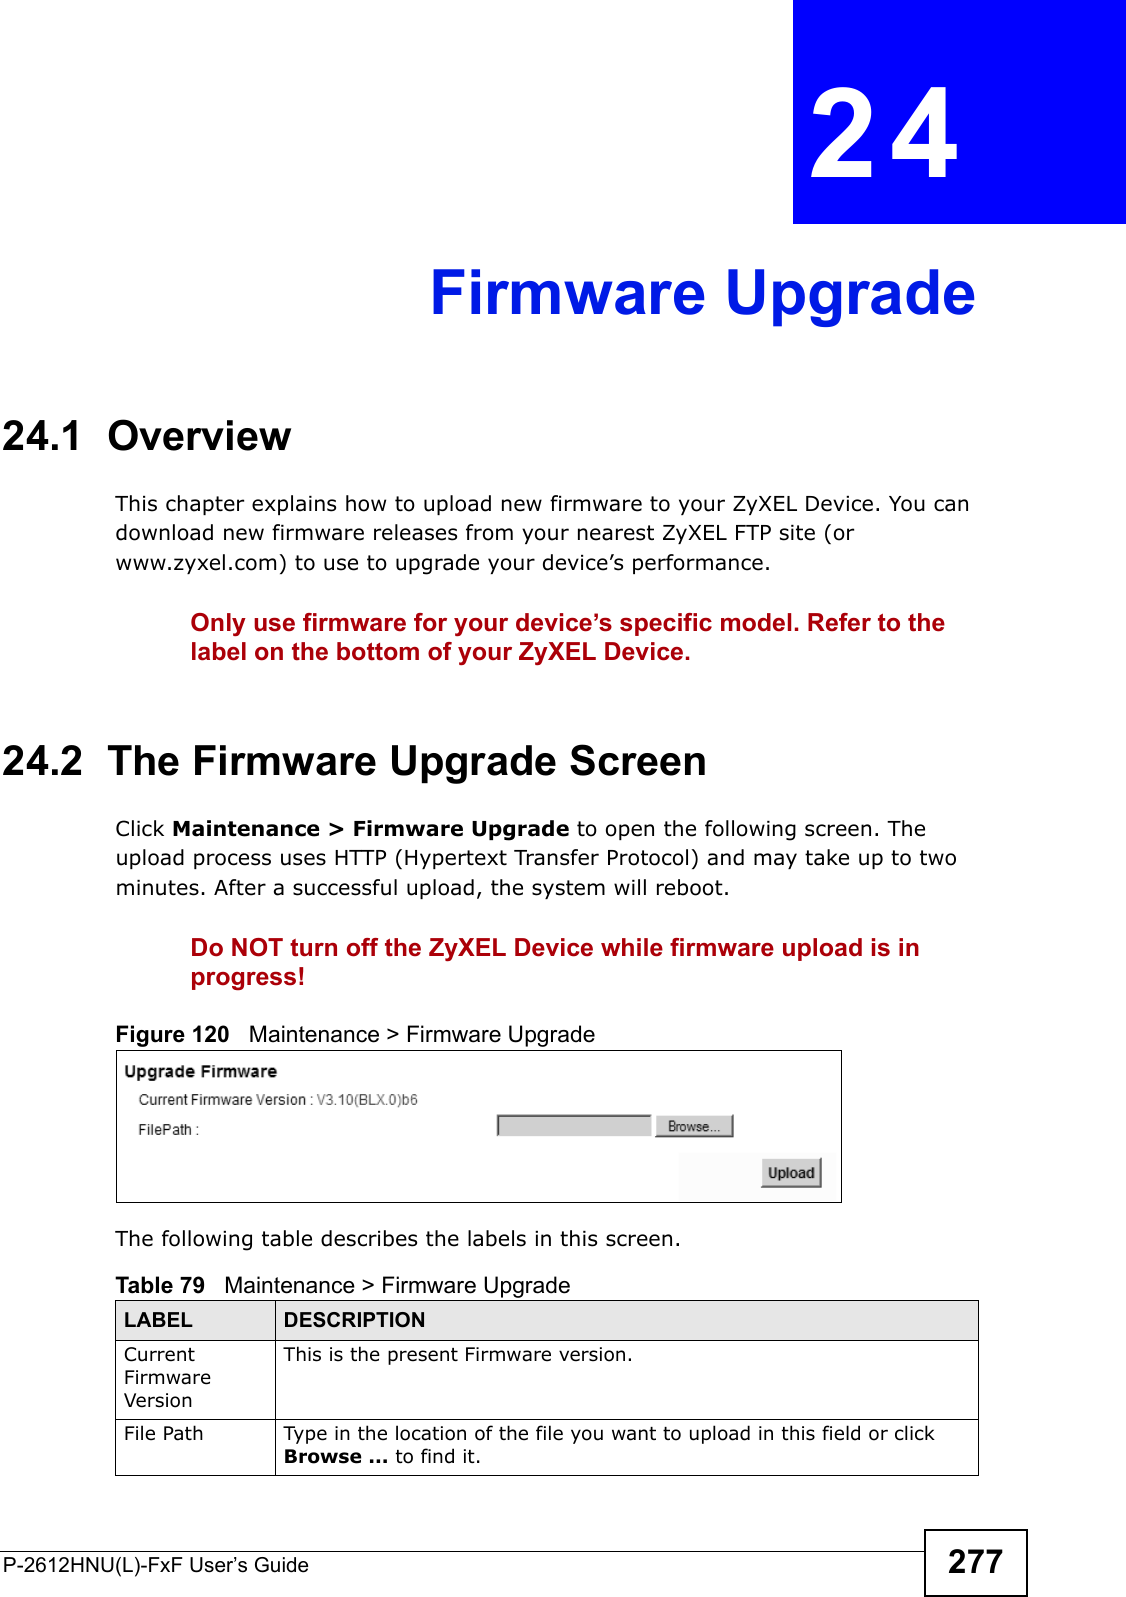 P-2612HNU(L)-FxF User’s Guide 277CHAPTER   24 Firmware Upgrade24.1  OverviewThis chapter explains how to upload new firmware to your ZyXEL Device. You can download new firmware releases from your nearest ZyXEL FTP site (or www.zyxel.com) to use to upgrade your device’s performance.Only use firmware for your device’s specific model. Refer to the label on the bottom of your ZyXEL Device.24.2  The Firmware Upgrade ScreenClick Maintenance &gt; Firmware Upgrade to open the following screen. The upload process uses HTTP (Hypertext Transfer Protocol) and may take up to two minutes. After a successful upload, the system will reboot. Do NOT turn off the ZyXEL Device while firmware upload is in progress!Figure 120   Maintenance &gt; Firmware UpgradeThe following table describes the labels in this screen. Table 79   Maintenance &gt; Firmware UpgradeLABEL DESCRIPTIONCurrent Firmware VersionThis is the present Firmware version. File Path Type in the location of the file you want to upload in this field or click Browse ... to find it.